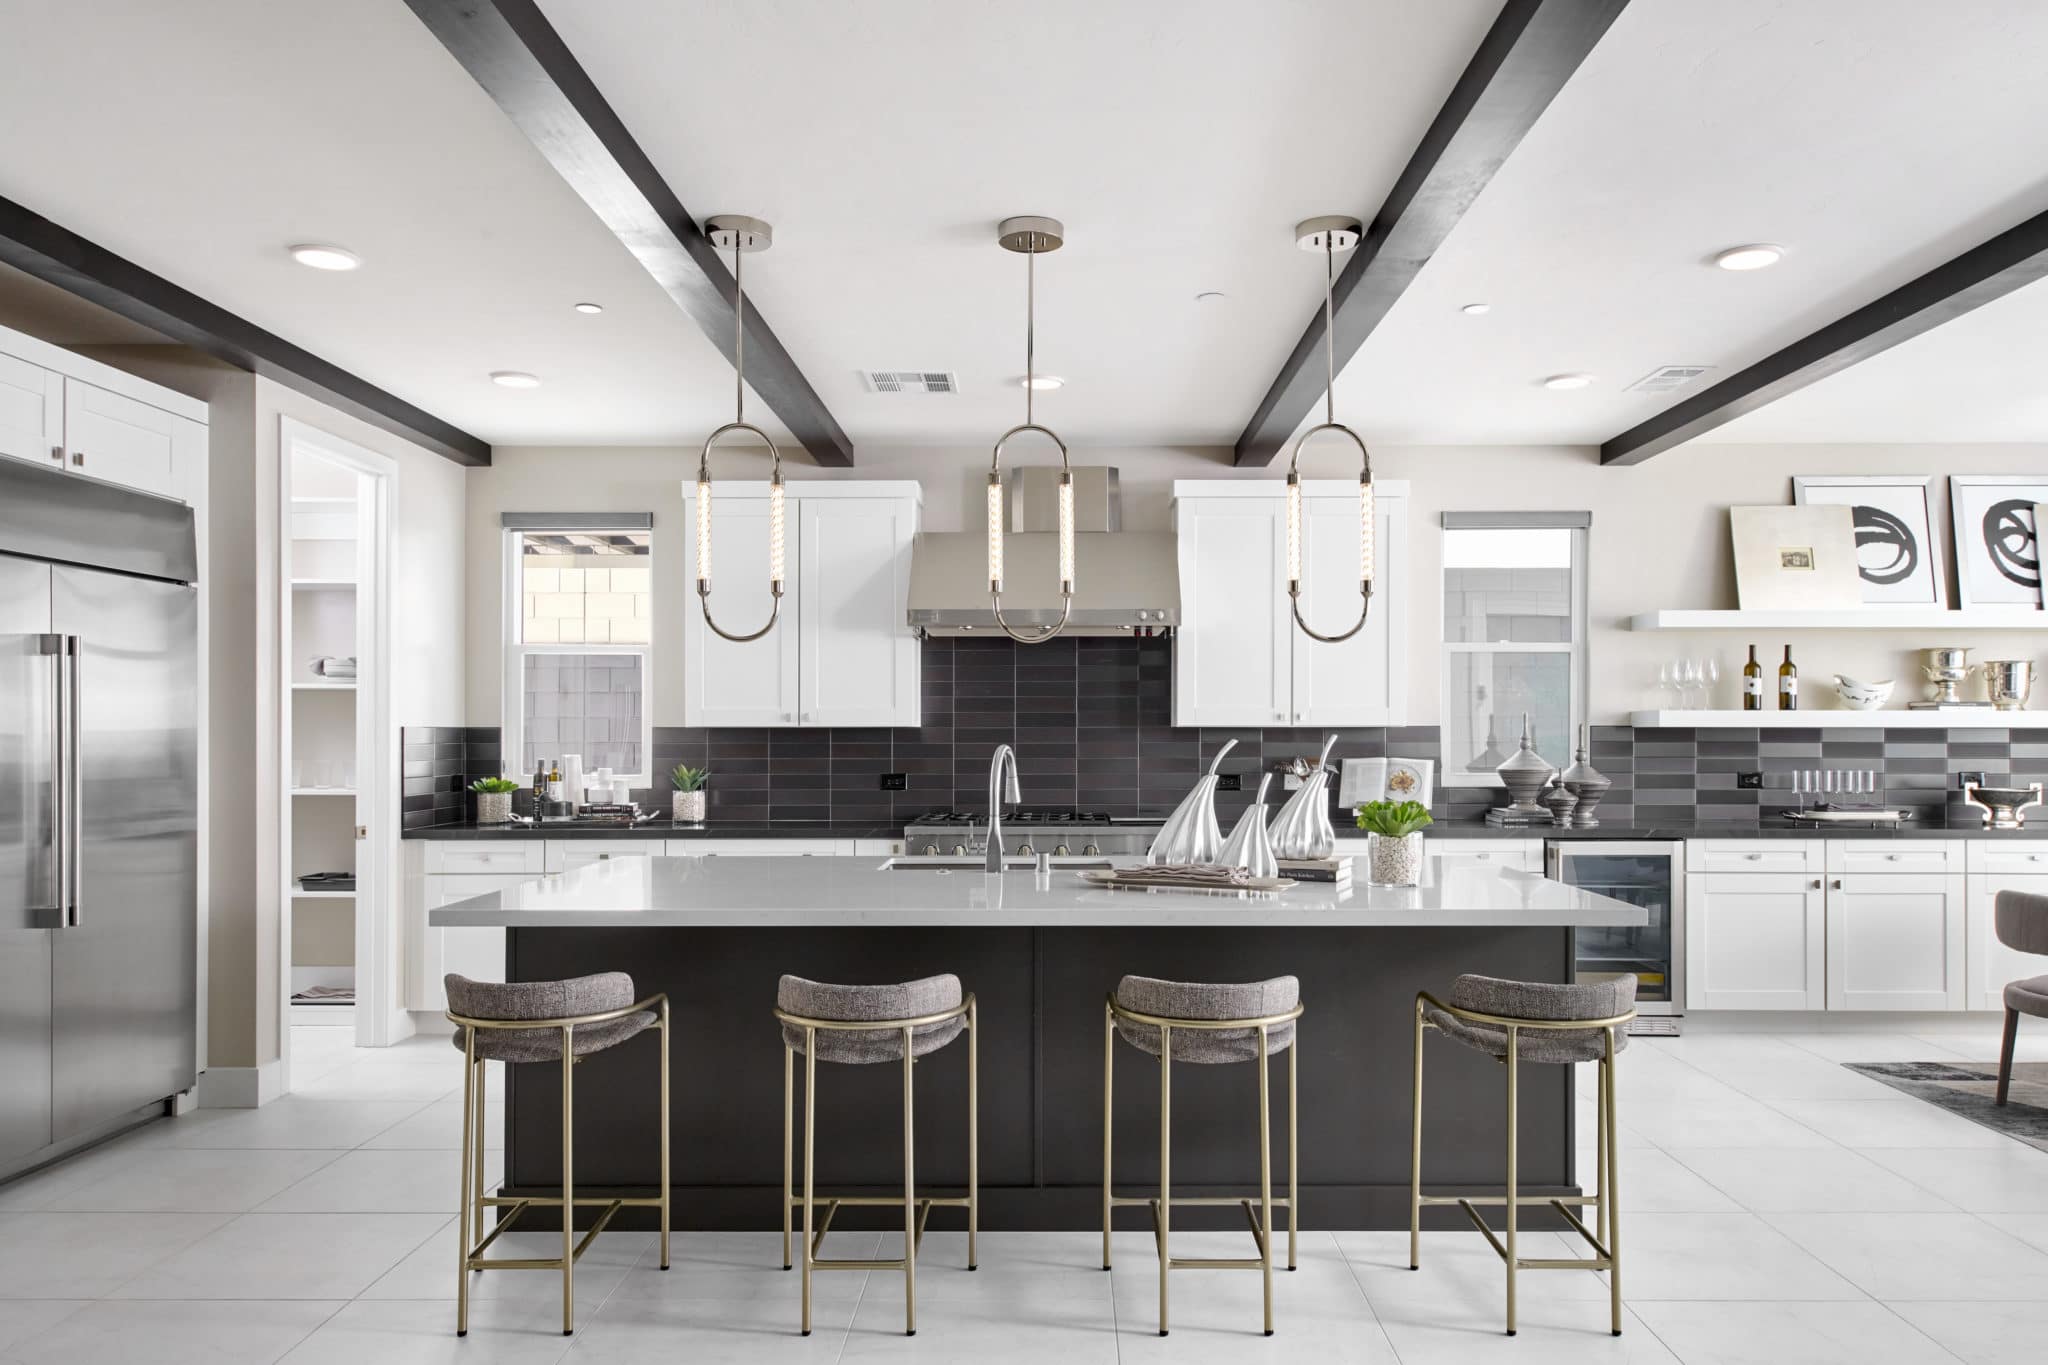 Kitchen of Plan 4 at Kings Canyon by Tri Pointe Homes